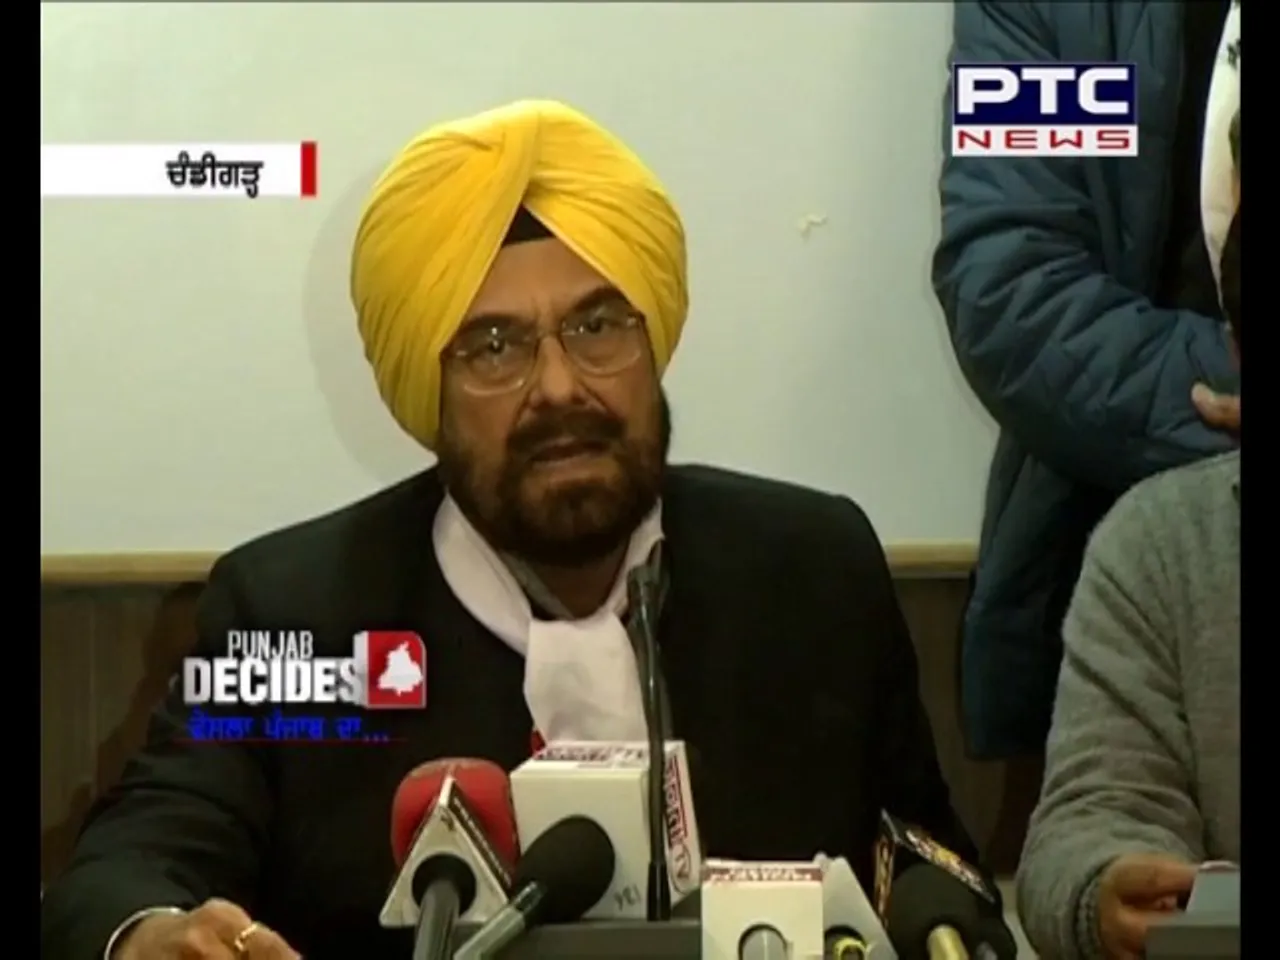 AAP CHANGES AMRITSAR CENTRAL CONTROVERSIAL CANDIDATE WITH ANOTHER CONTROVERSIAL CANDIDATE